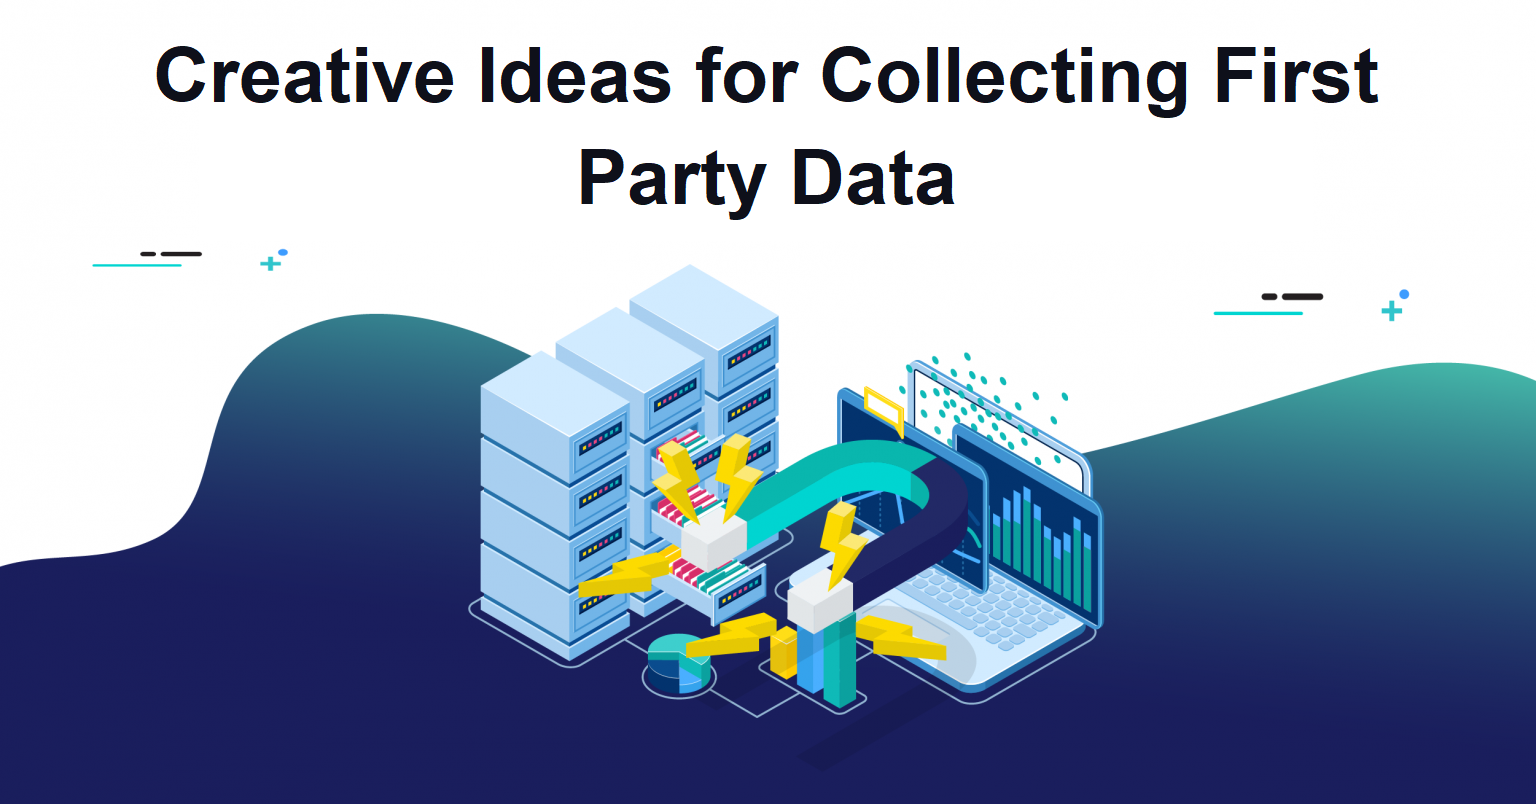 Creative Ideas for Collecting First Party Data